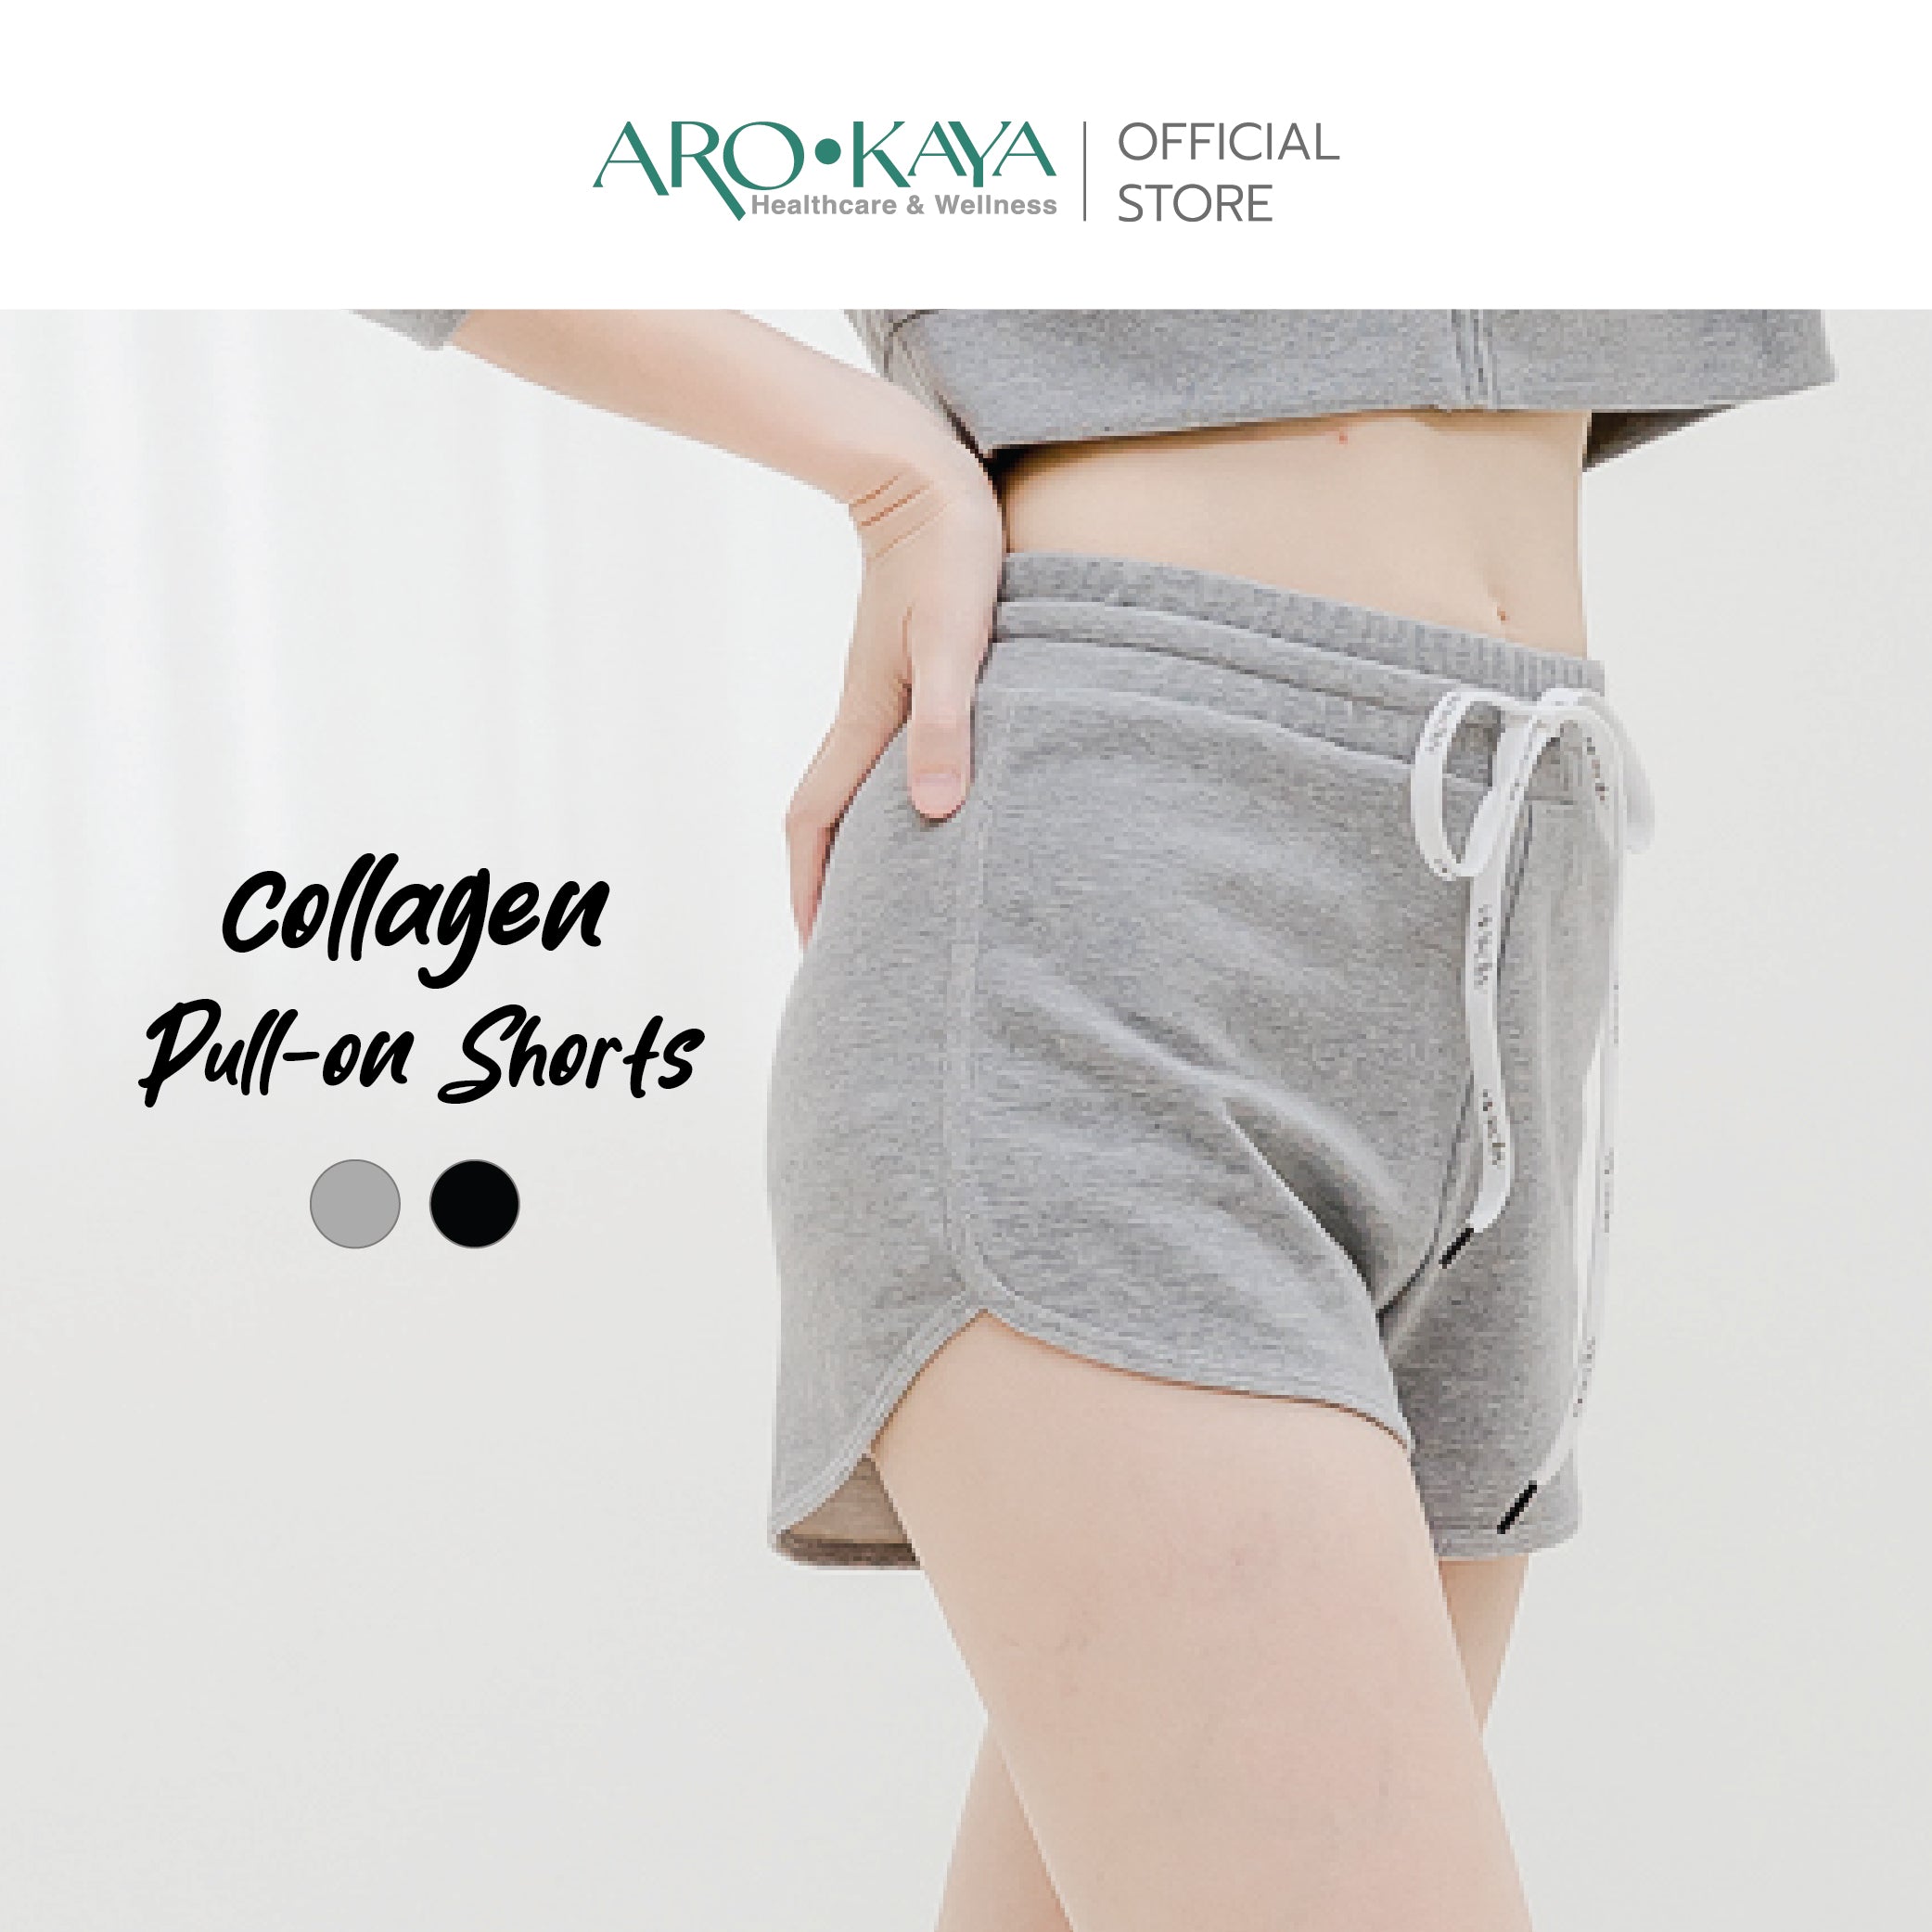 COLLAGEN PULL-ON SHORTS